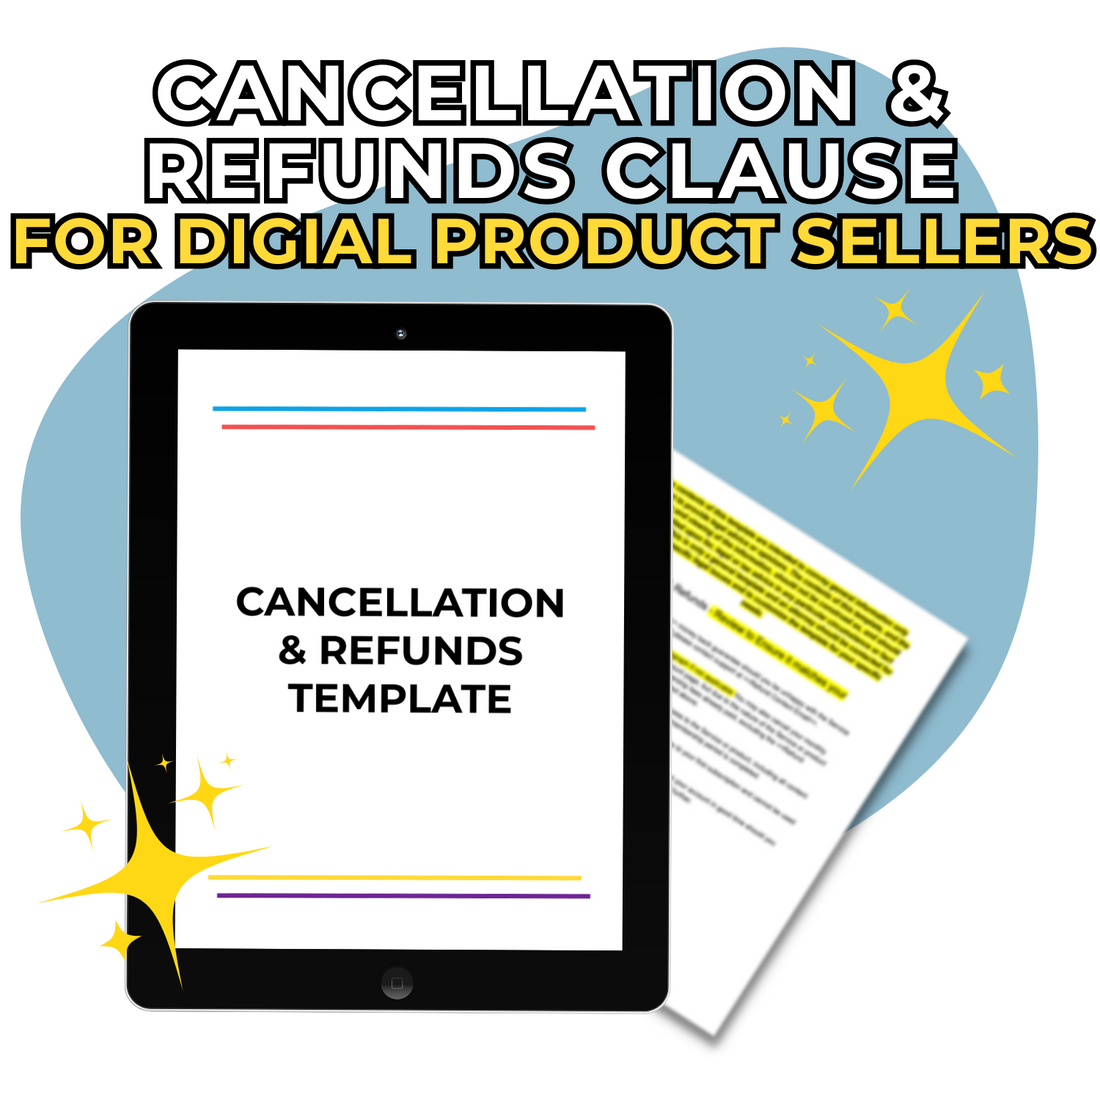 Graphic showing a tablet with text about Cancellation &amp; Refunds policies for digital product sellers, accompanied by shining stars and a document from ElizabethStapleton.com.